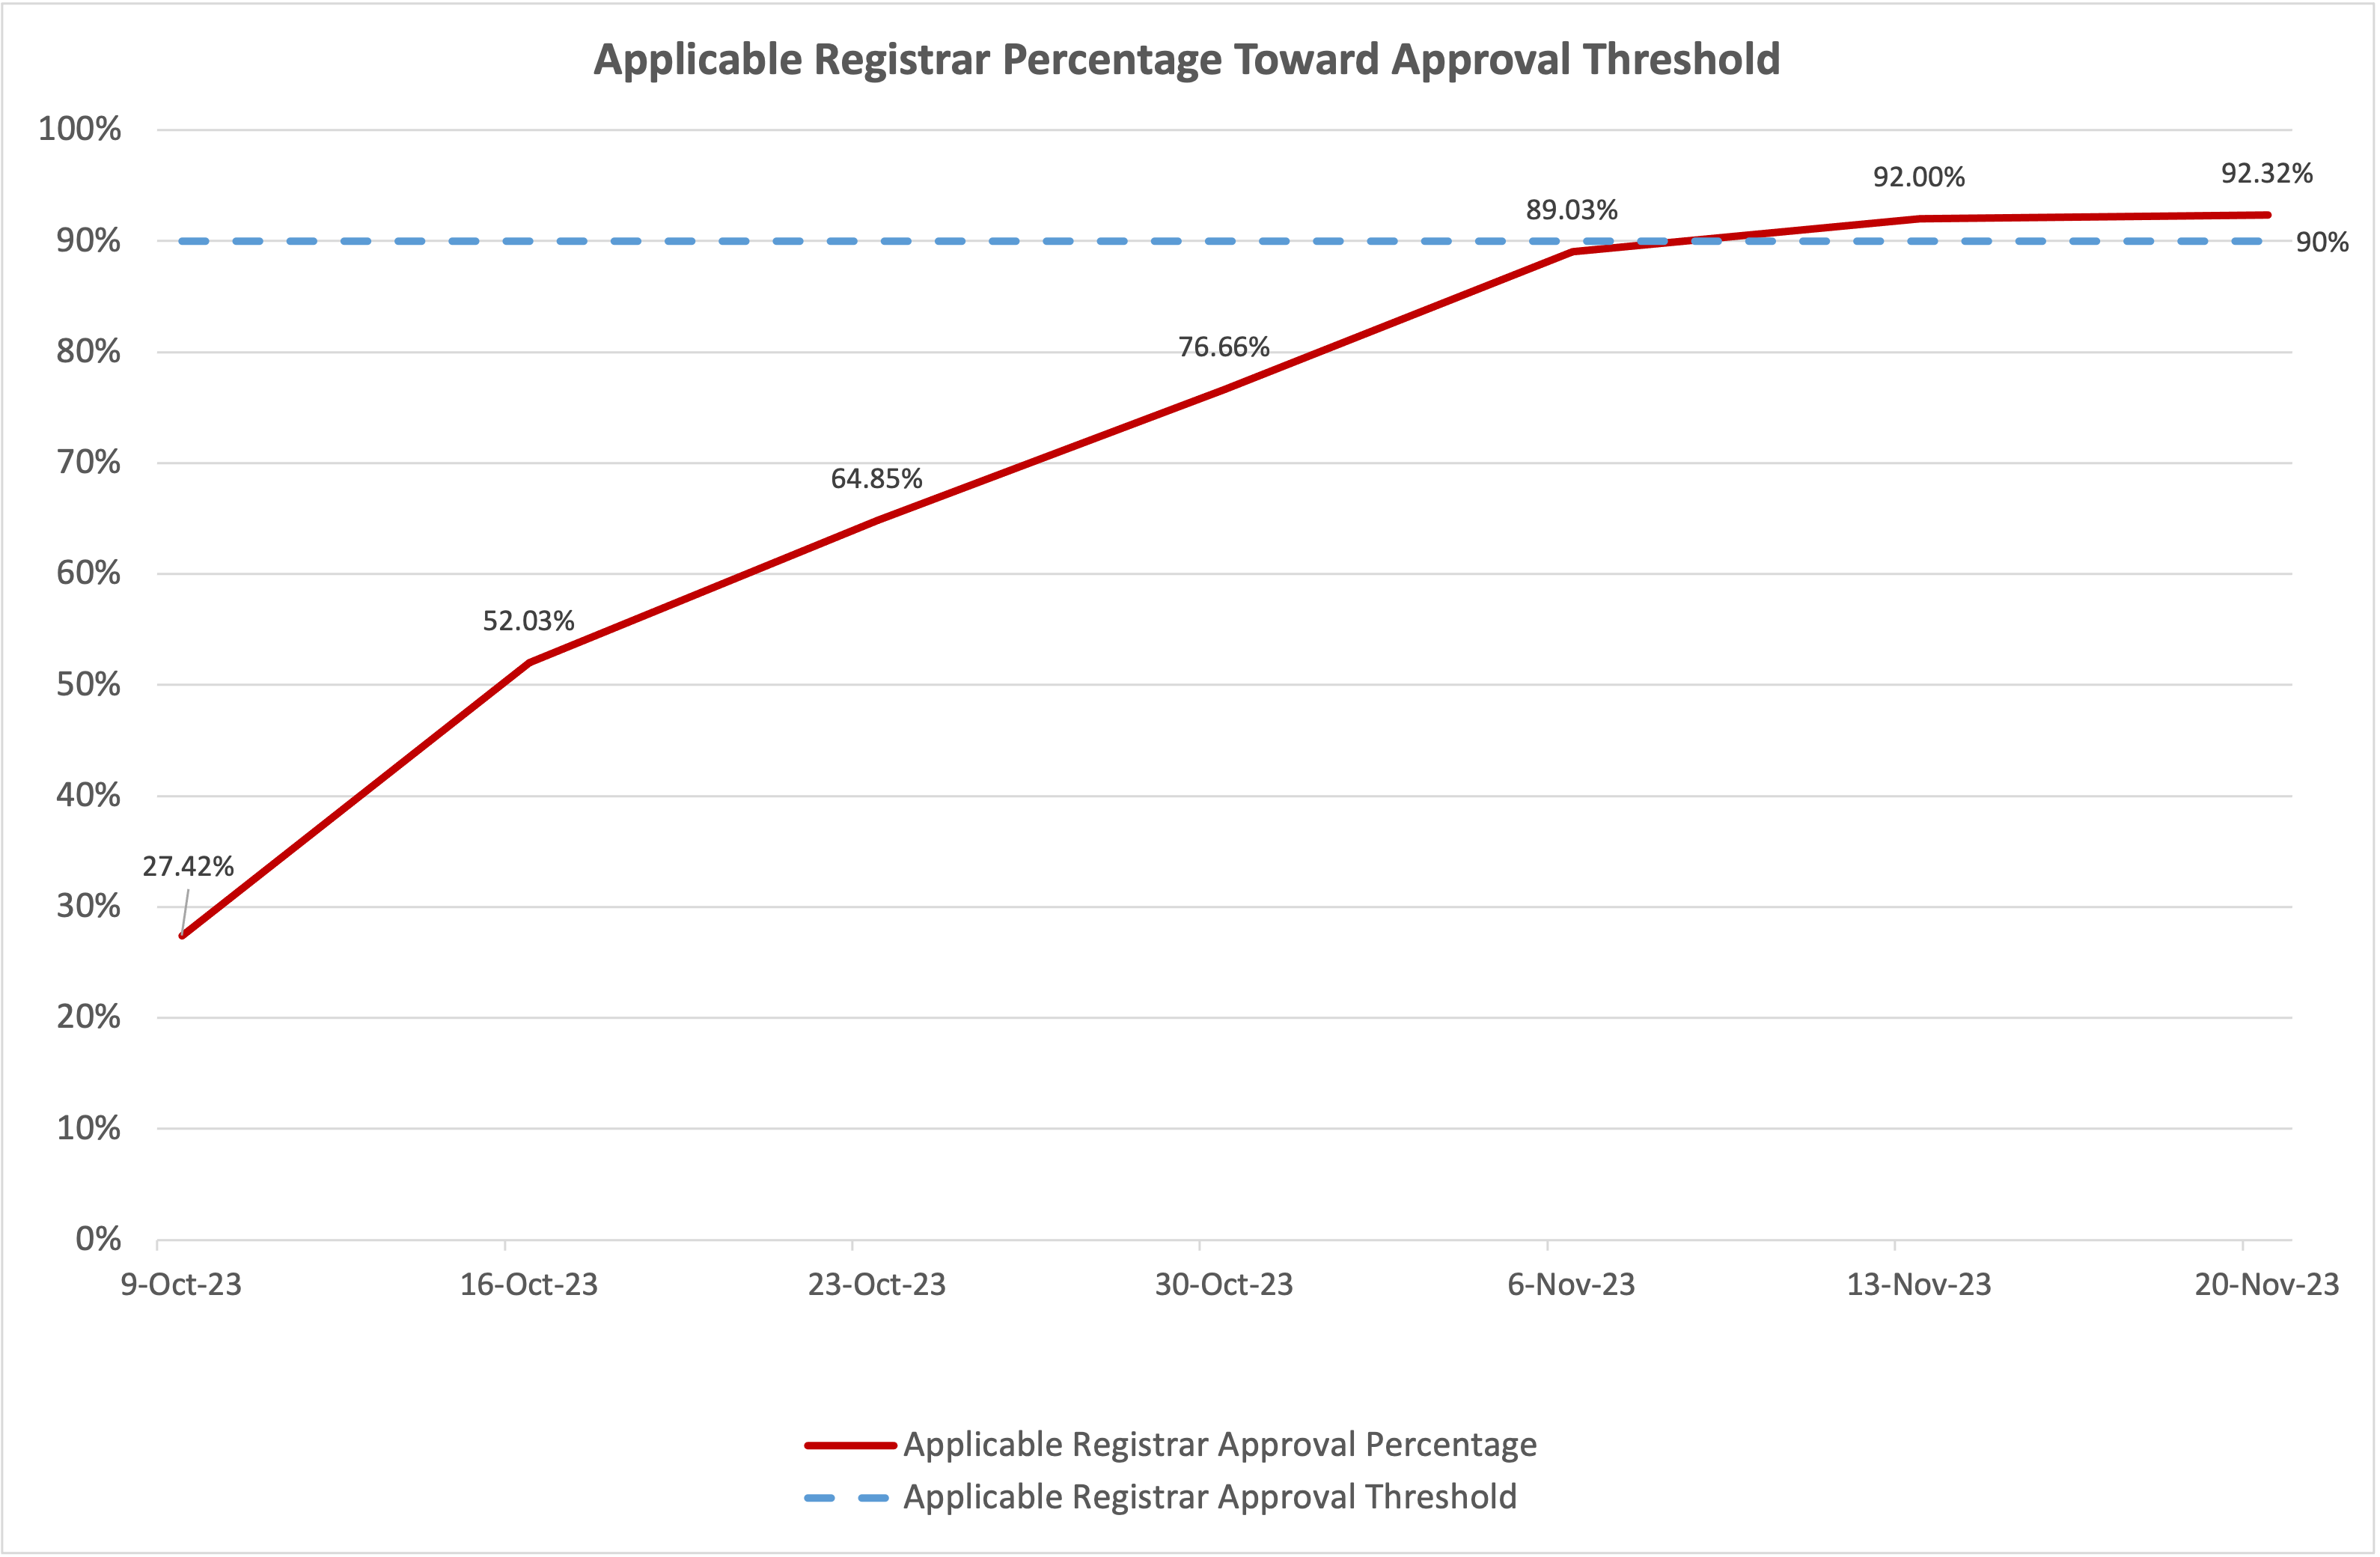 Line chart of the progress of the vote over time towards the affirmative approval of the percentage of total domain names under management (TDUMs) threshold for Applicable Registrars. The TDUMs approval threshold is 90%. As of the 20th of November 2023, the affirmative votes towards the threshold is 92.32%.